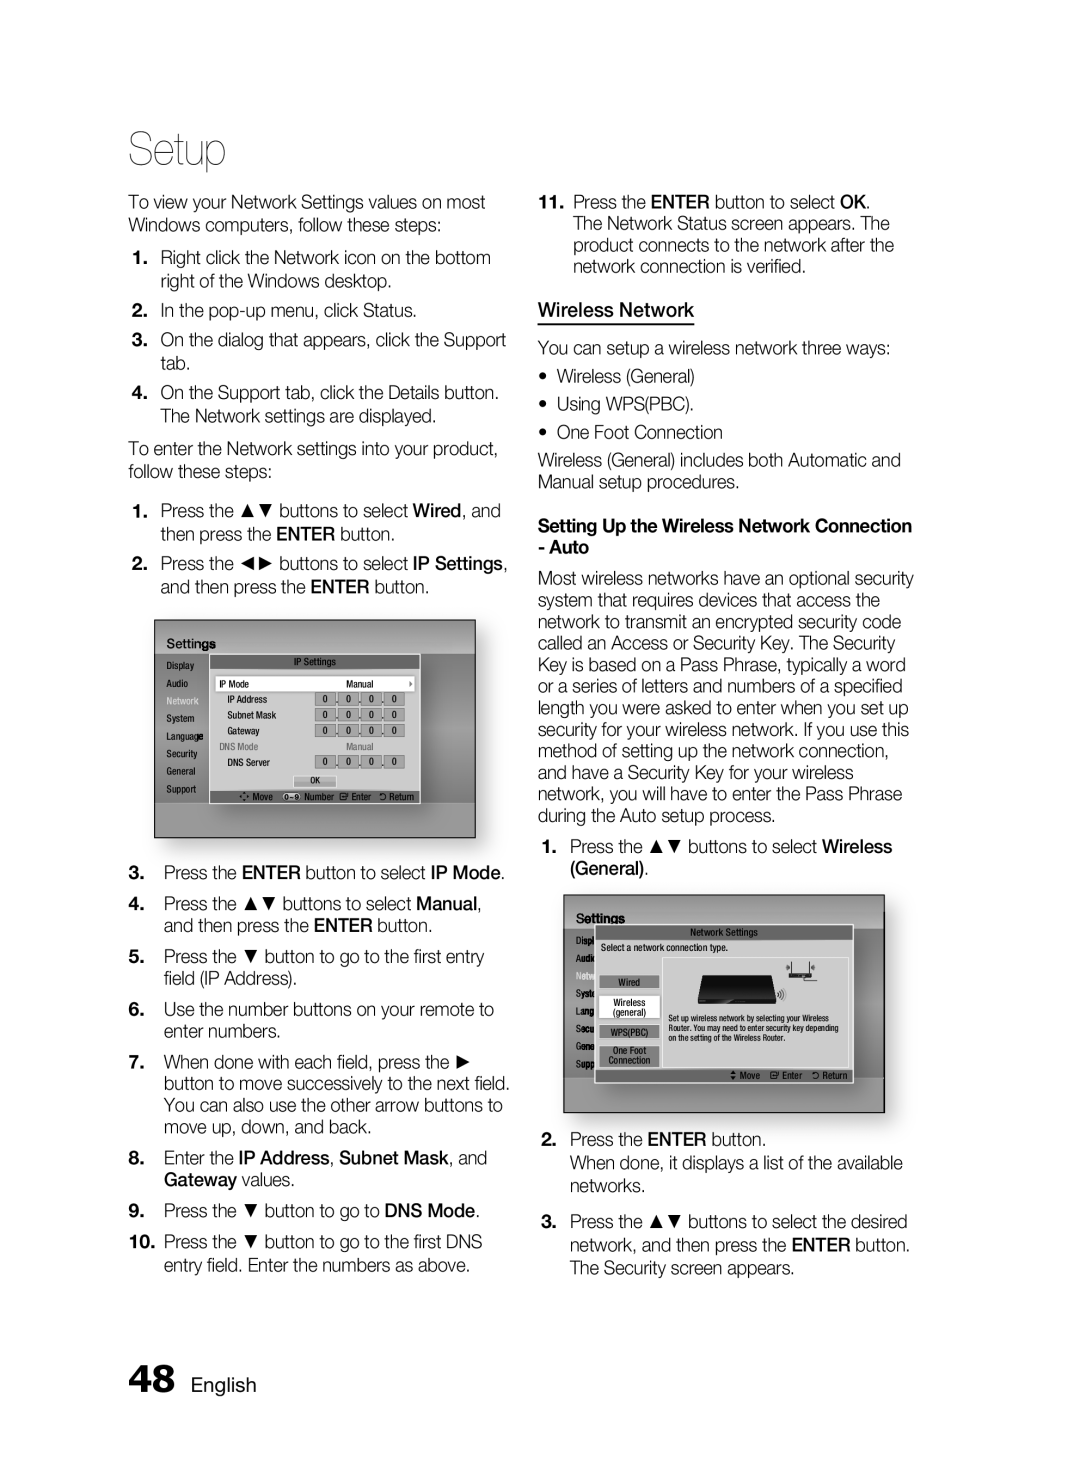 Samsung HW-D7000 user manual Setup, English, Setting Up the Wireless Network Connection - Auto, ﬁeld IP Address 